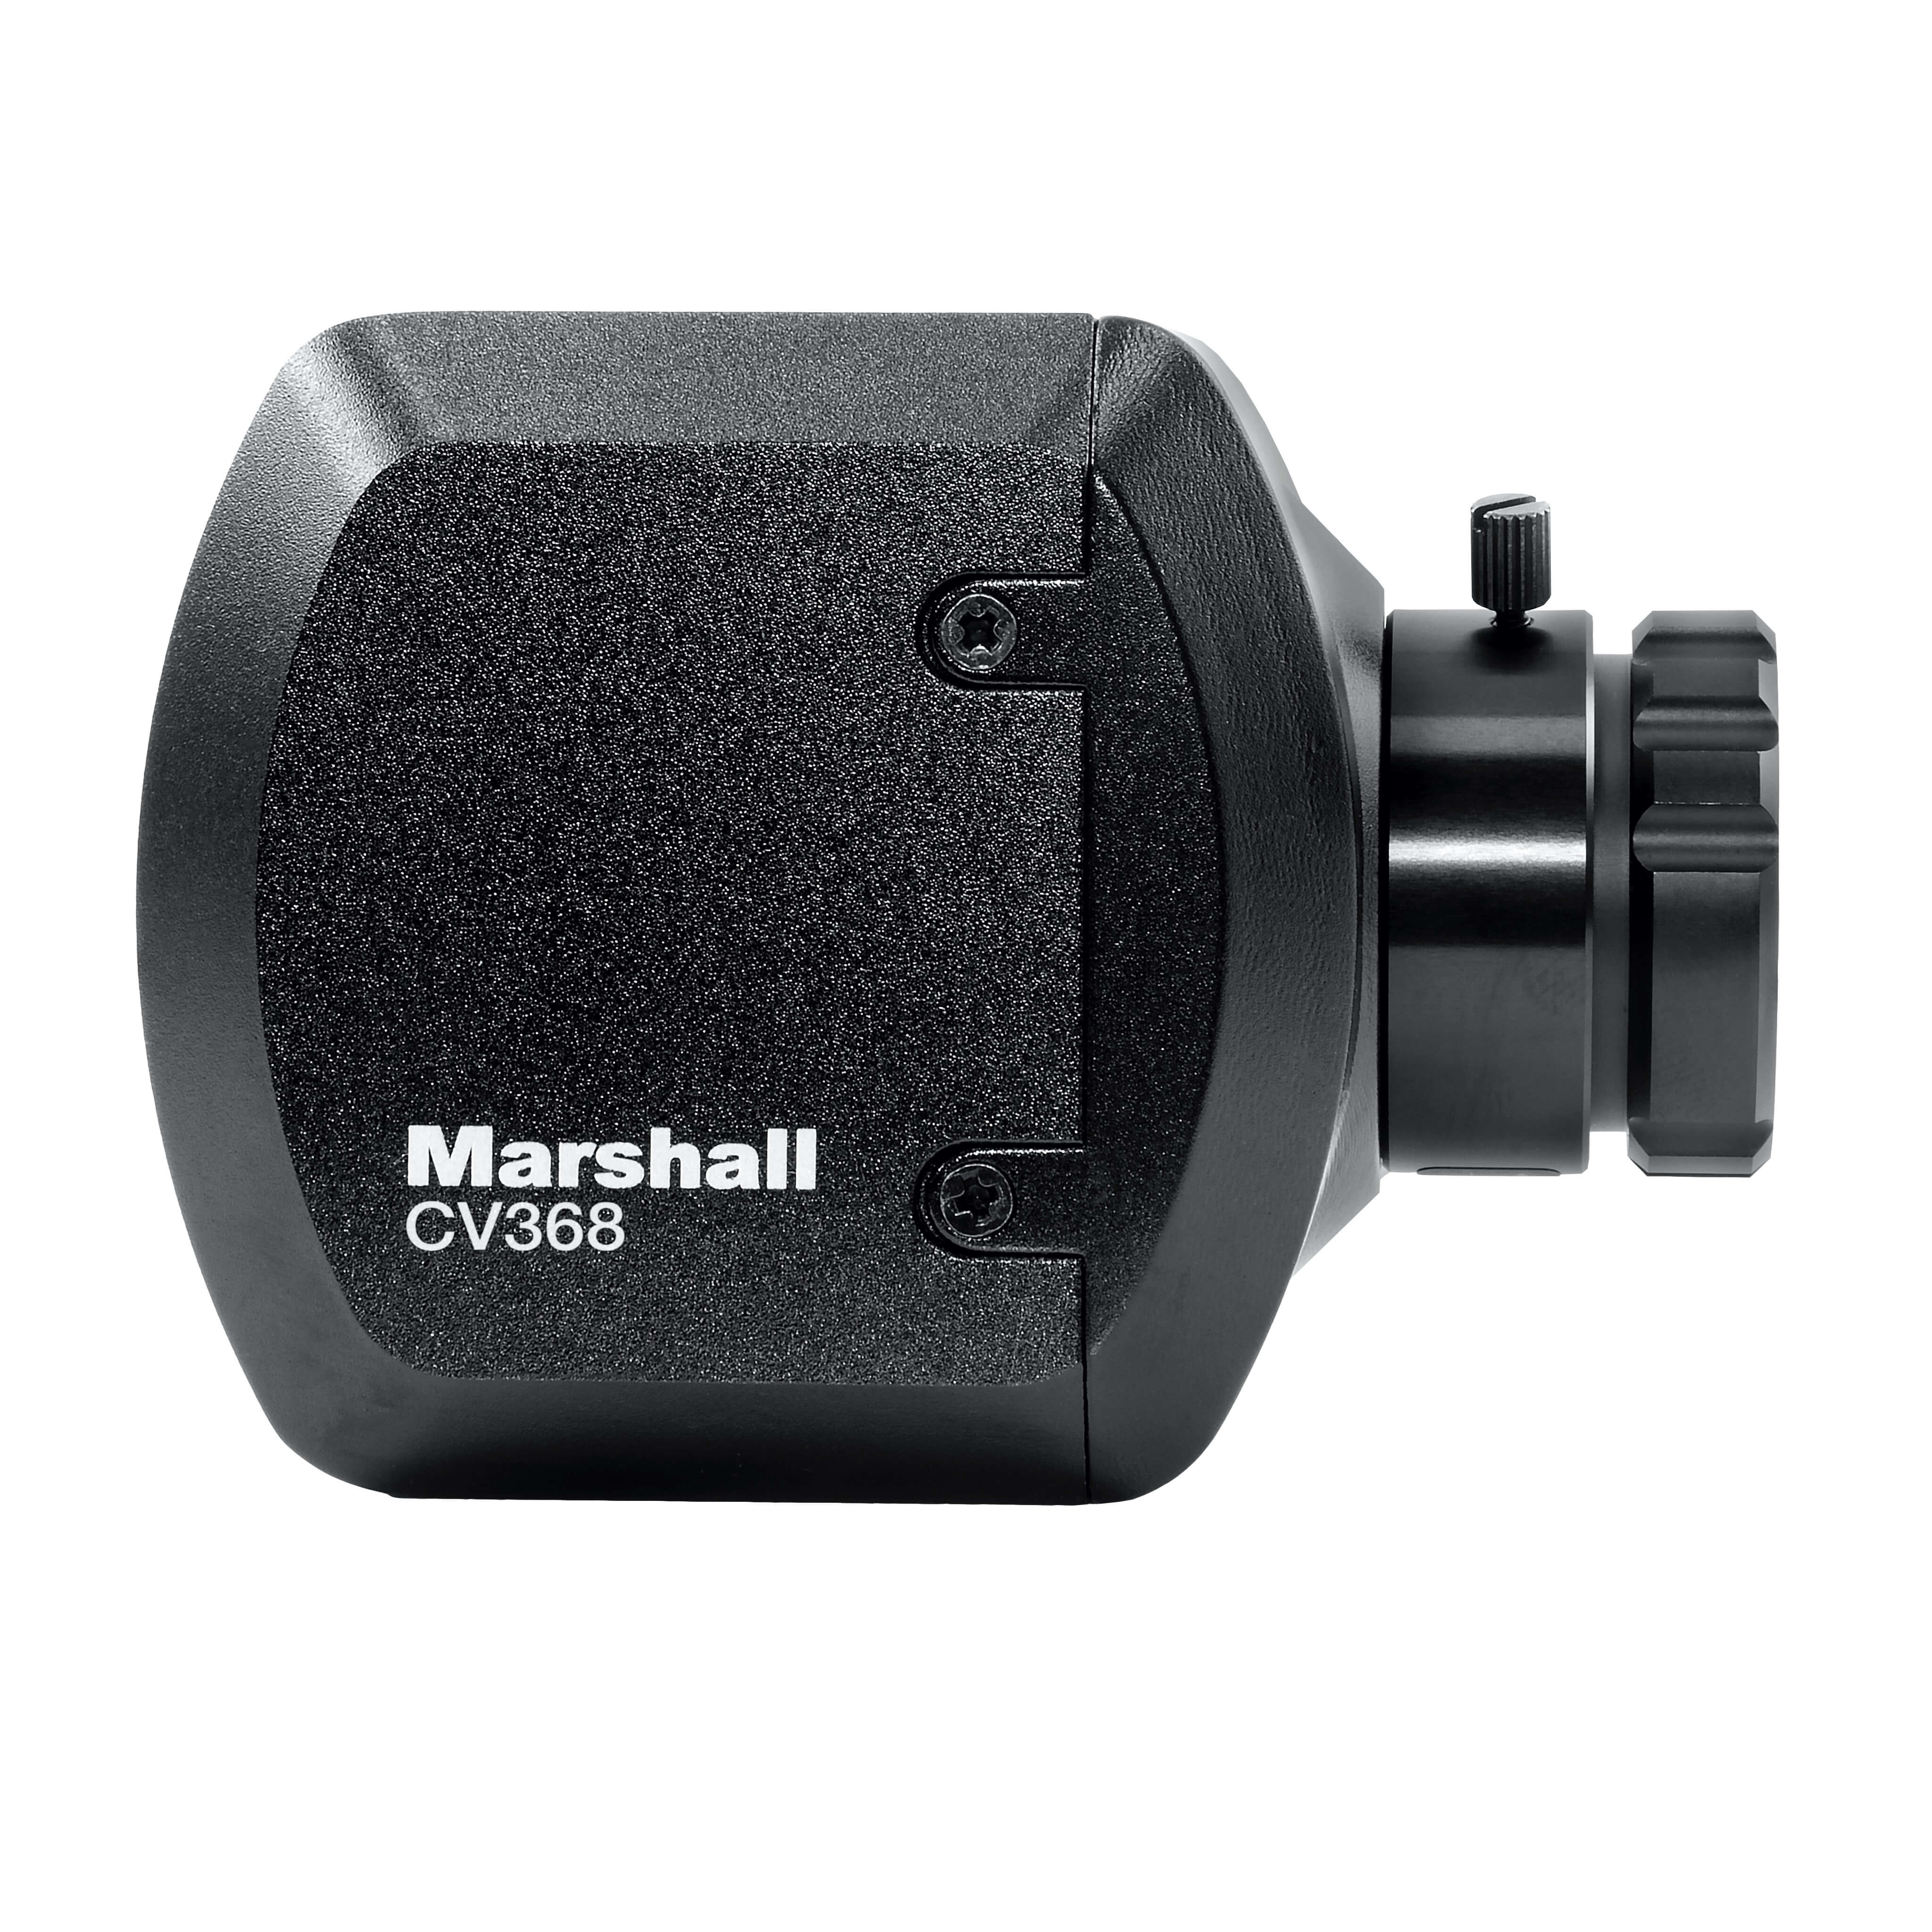 Marshall CV368 - Compact Global HD Camera with Genlock 3G-SDI and HDMI, right side